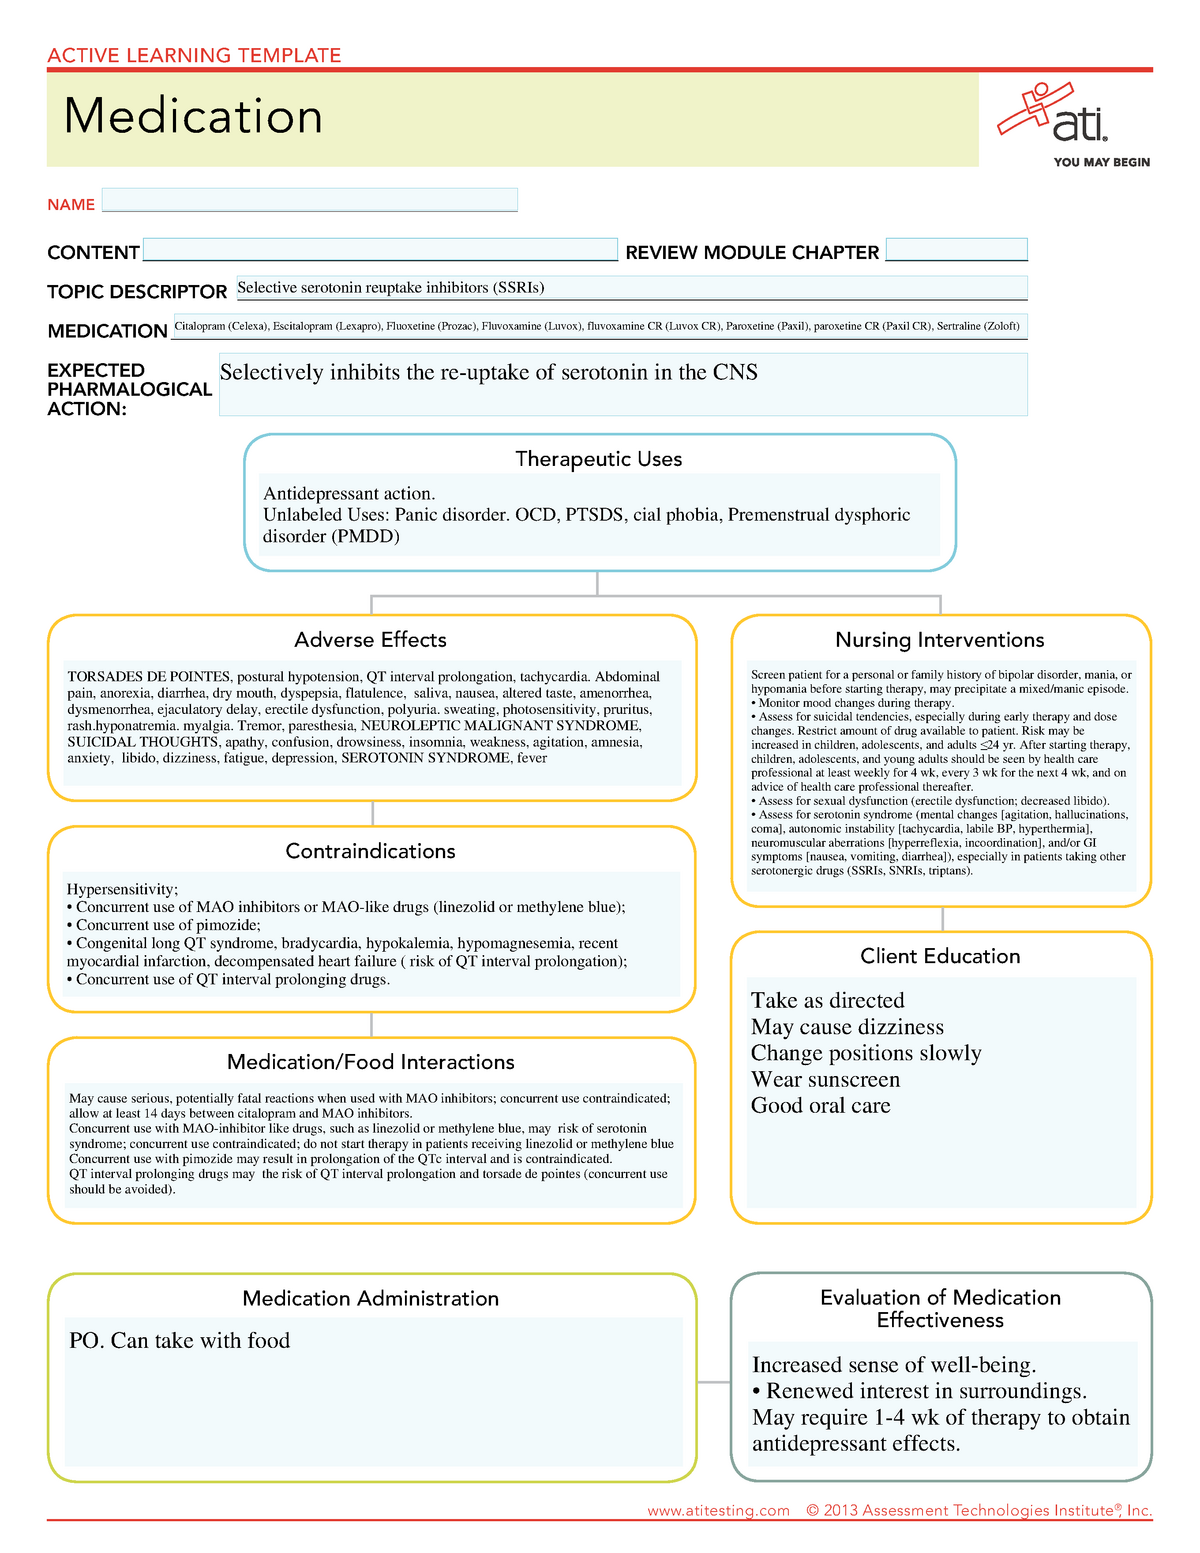 ati-medication-template-ssri-adverse-effects-contraindications-medication-food-interactions